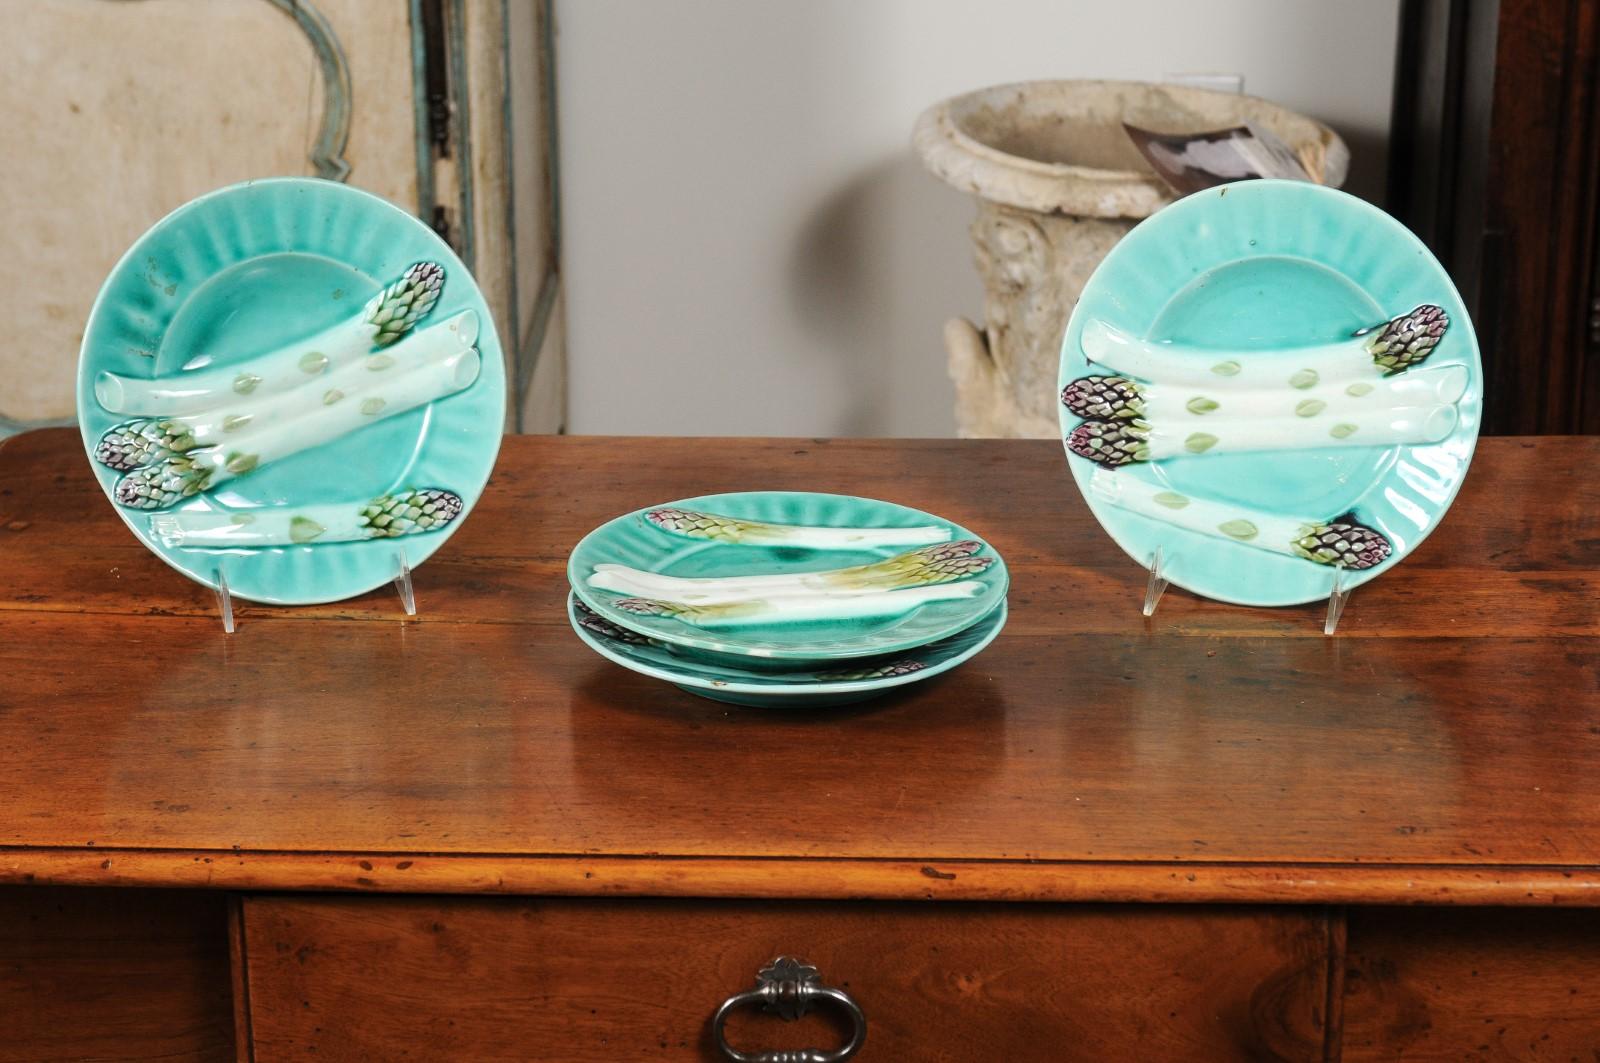 Four French 19th century turquoise barbotine asparagus plates from Lunéville, priced and sold individually. Born in the Lorraine area of France during the second half of the 19th century, each of these exquisite asparagus plates features a deep